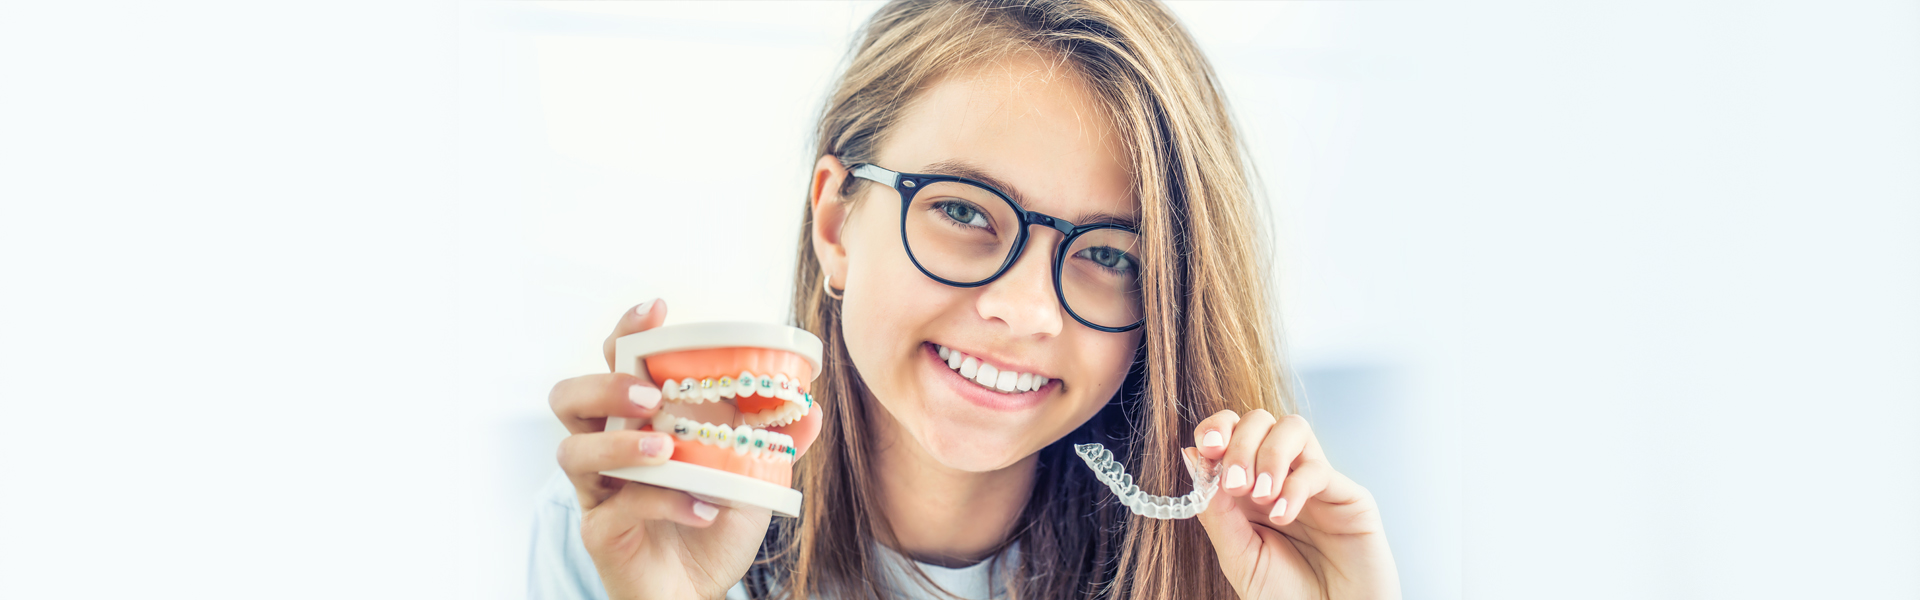 Invisalign Aligners vs. Braces: Which Is Right For Your Smile? 